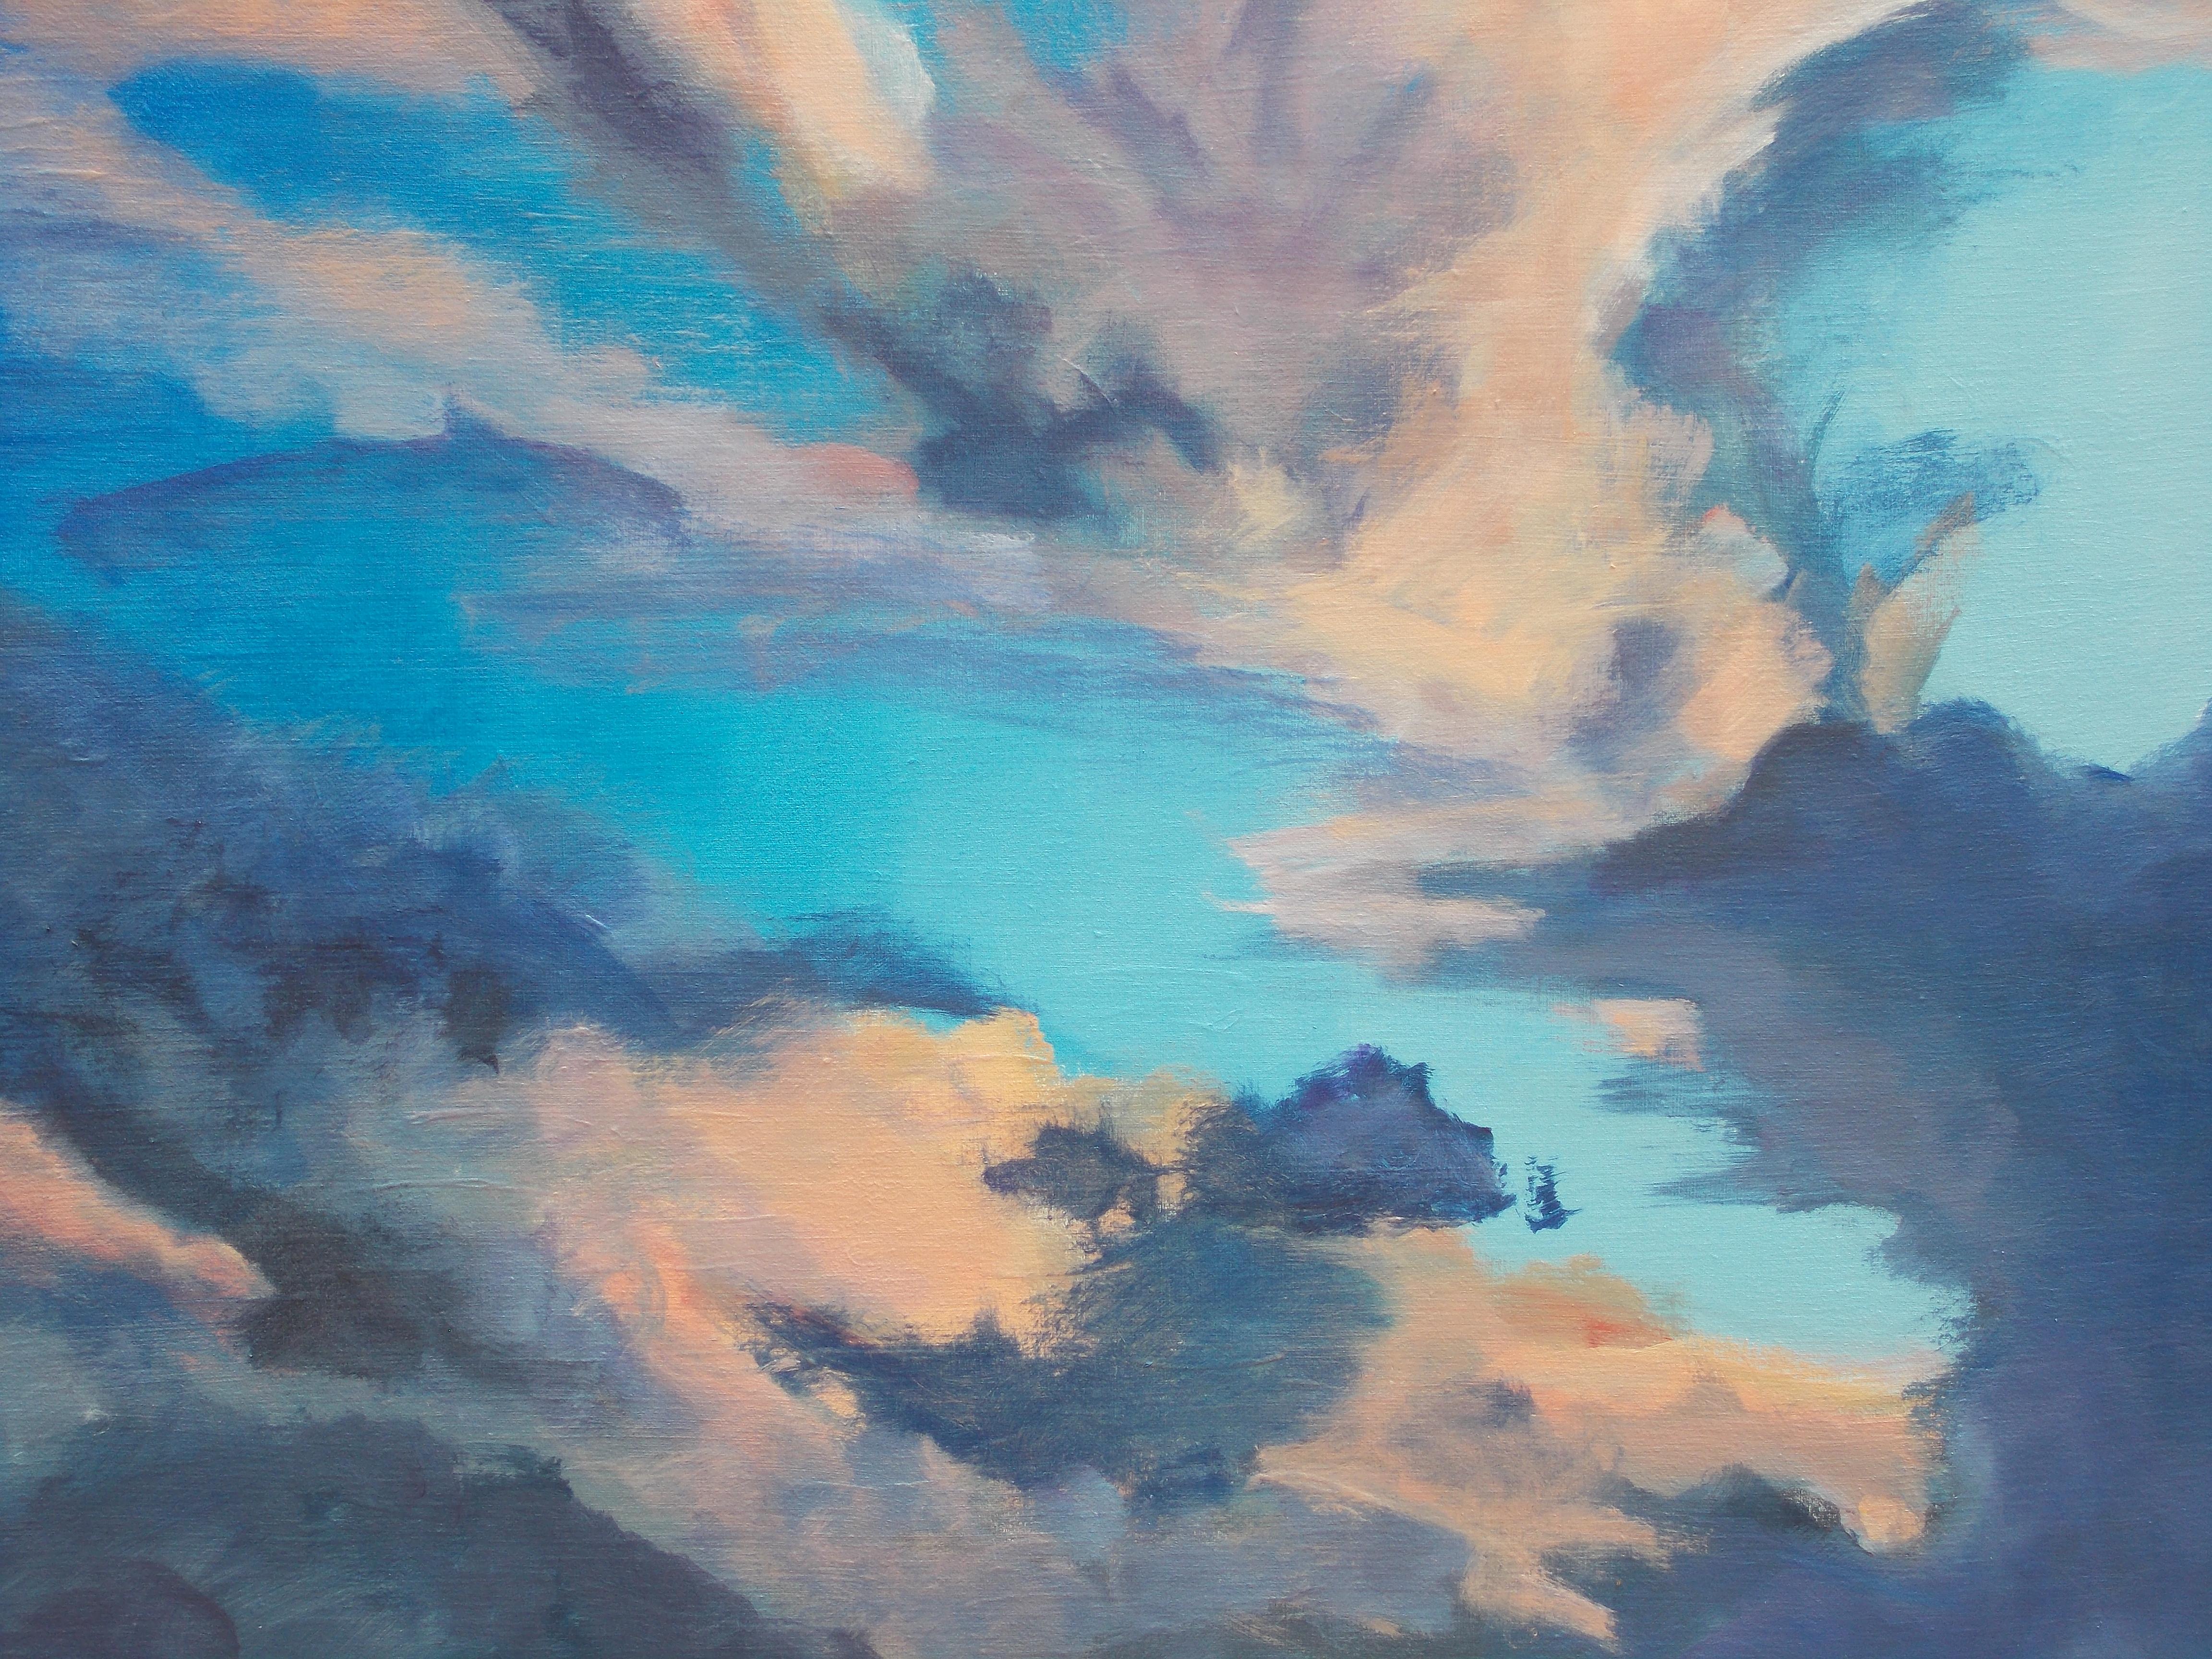 Painter's Sky  - Abstract Impressionist Painting by Benjamin  Thomas